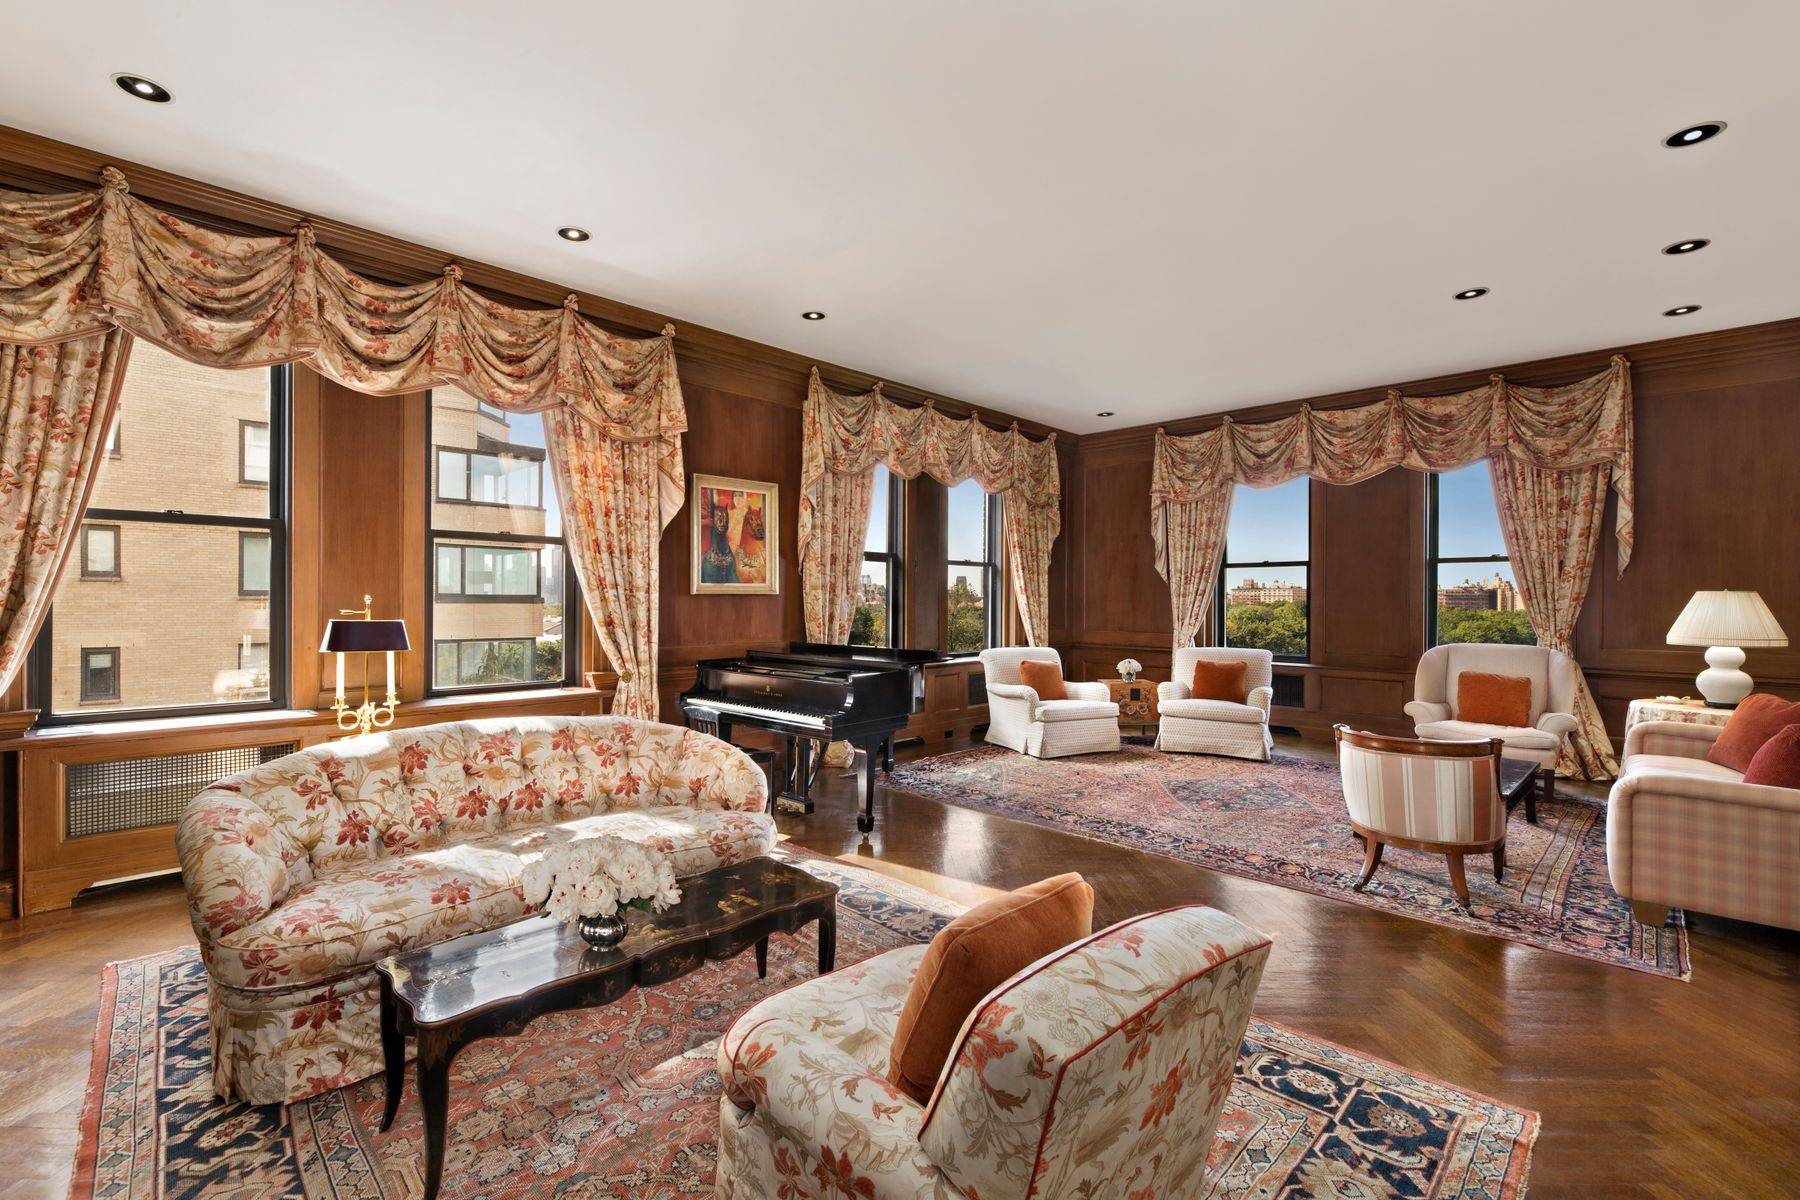 This sprawling 10th floor residence is perched high atop one of Carnegie Hill's most coveted prewar cooperatives and offers stunning views of Central Park and the Reservoir.